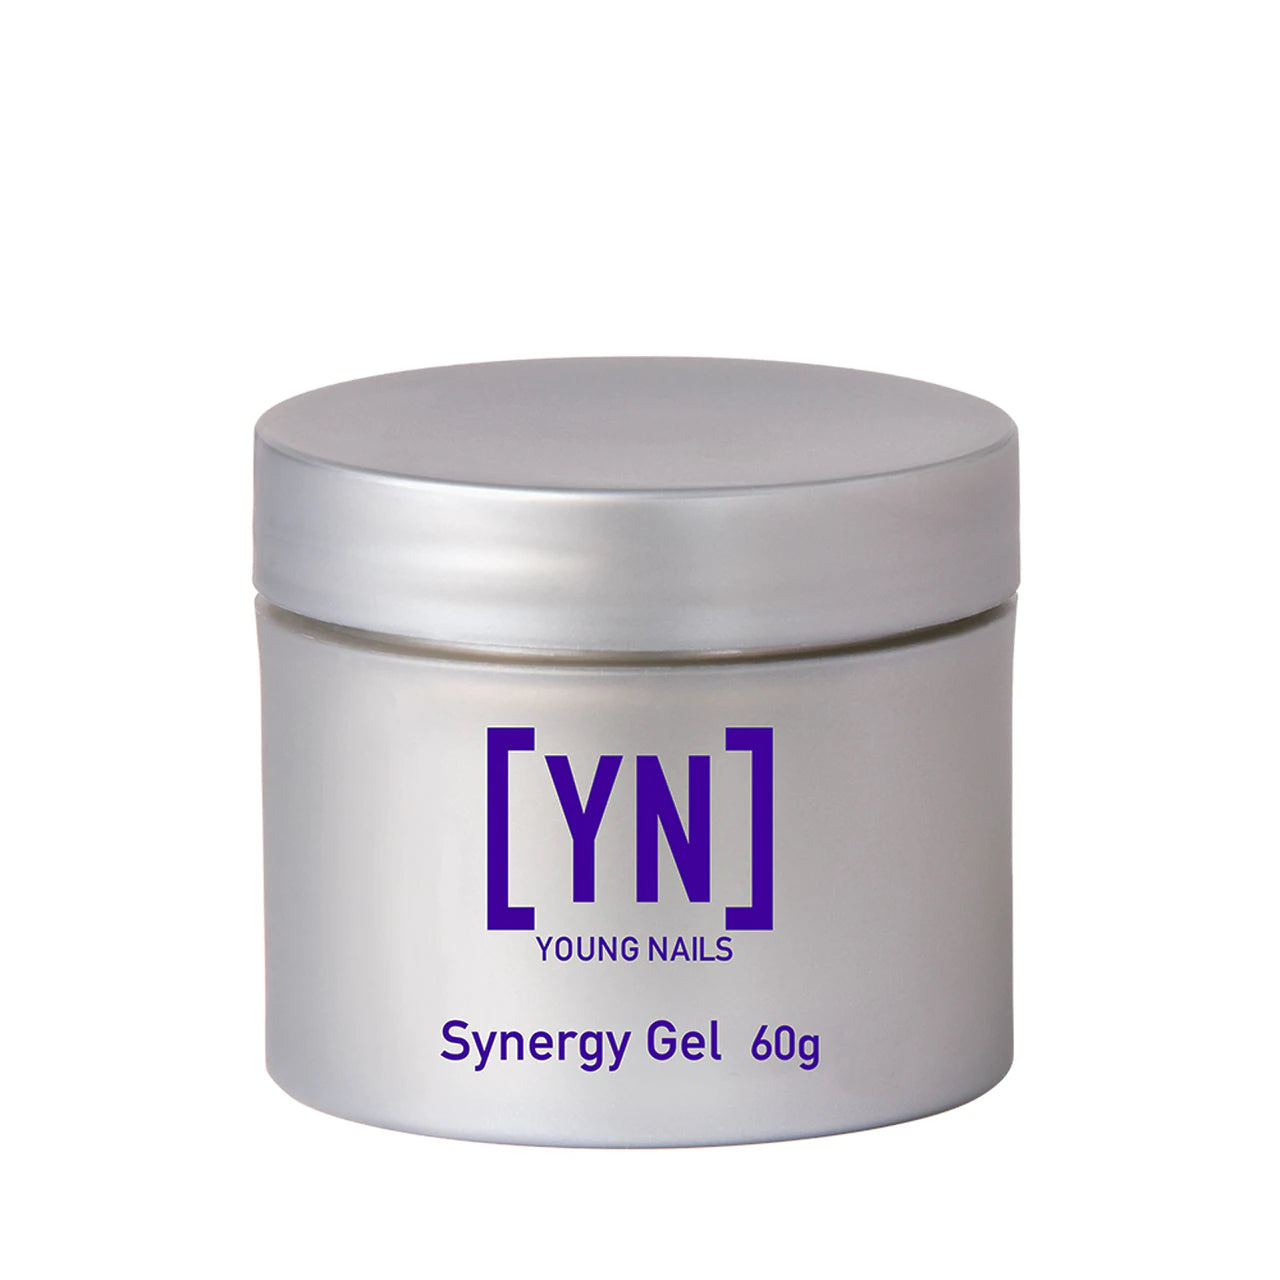 YOUNG NAILS Synergy Gel - Concealer Pink